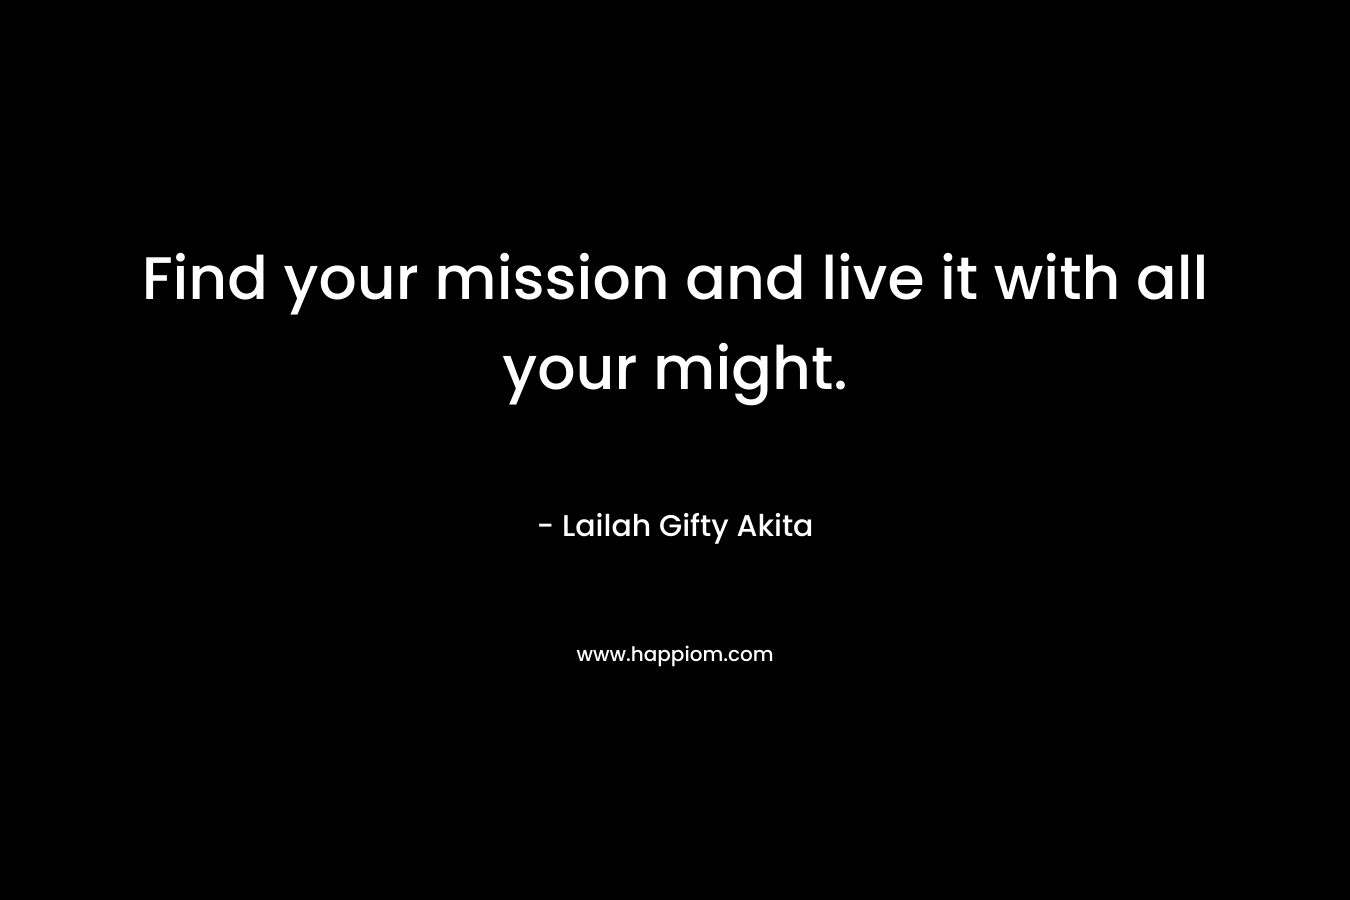 Find your mission and live it with all your might.